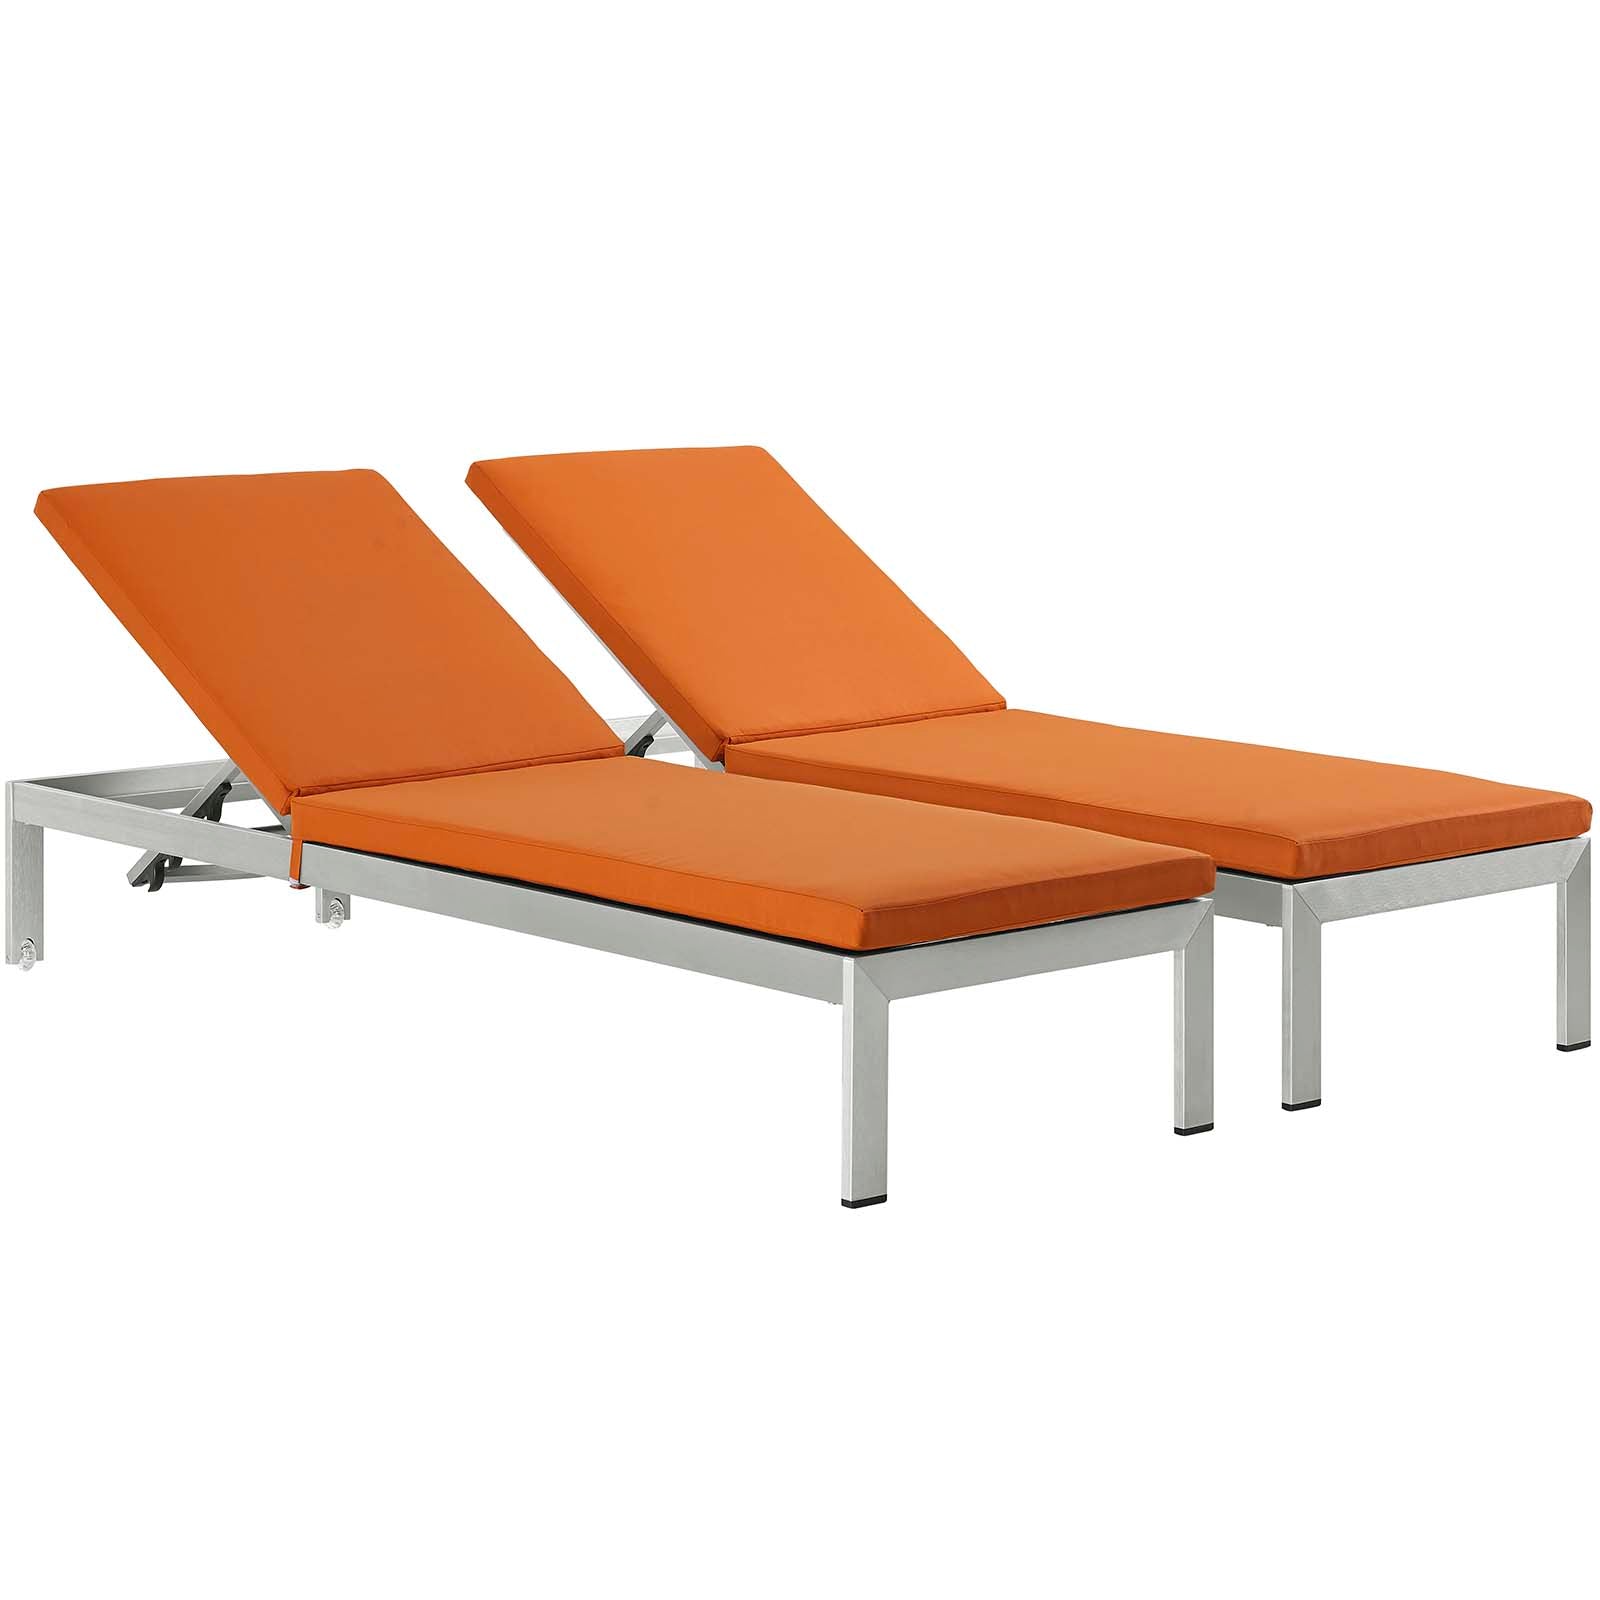 Modway Outdoor Loungers - Shore Chaise with Cushions Outdoor Patio Aluminum Silver Orange (Set of 2)